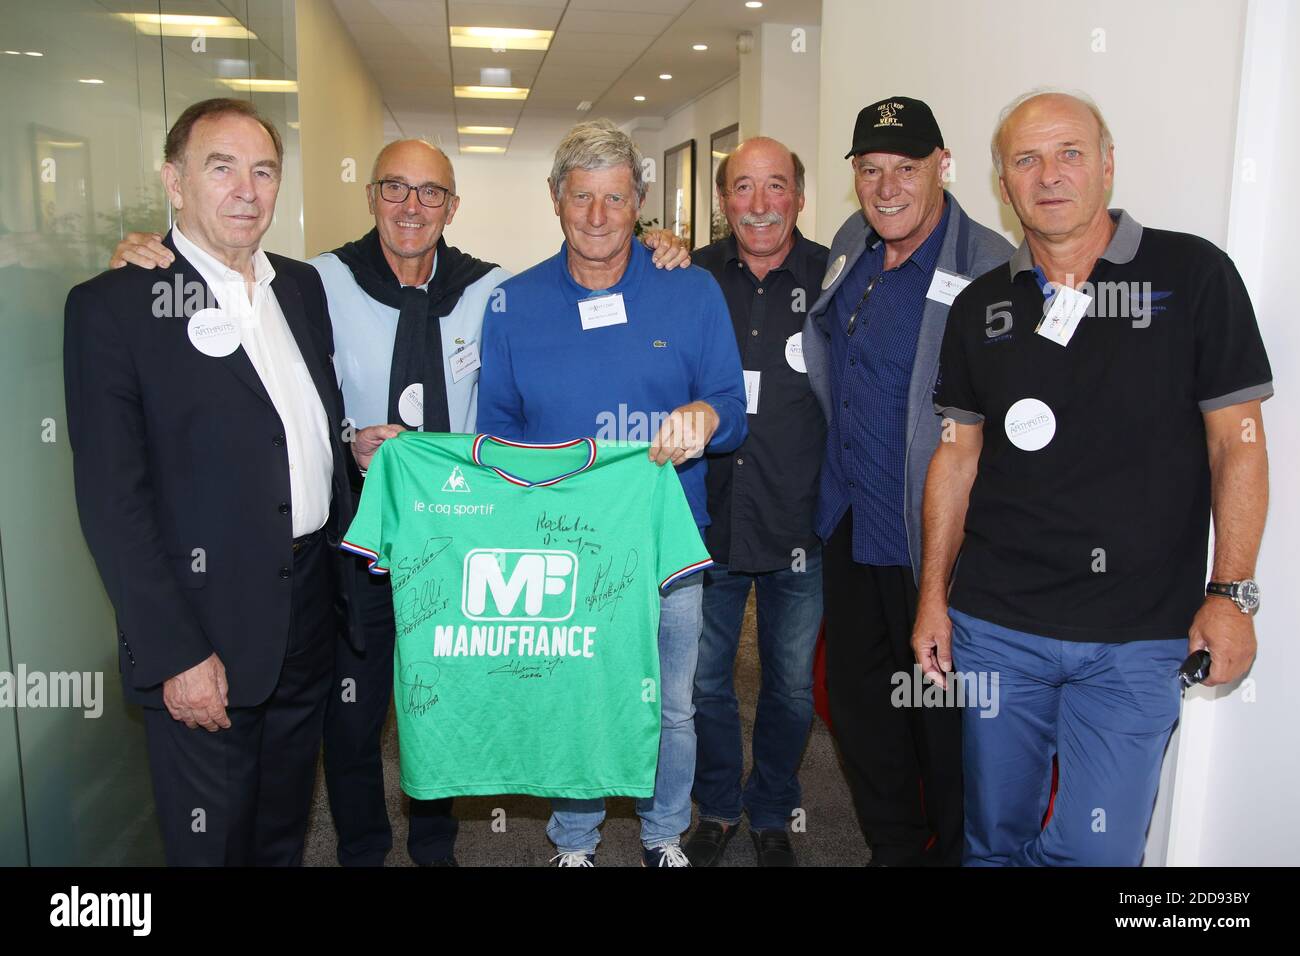 Ivan Curkovic, Christian Sarramagna, Jean-Michel Larque, Patrick Revelli,  Oswaldo Piazza and Dominique Bathenay formers ASSE players attending the  14th Aurel BGC Charity Day to honor the memory of the 658 BGC employees